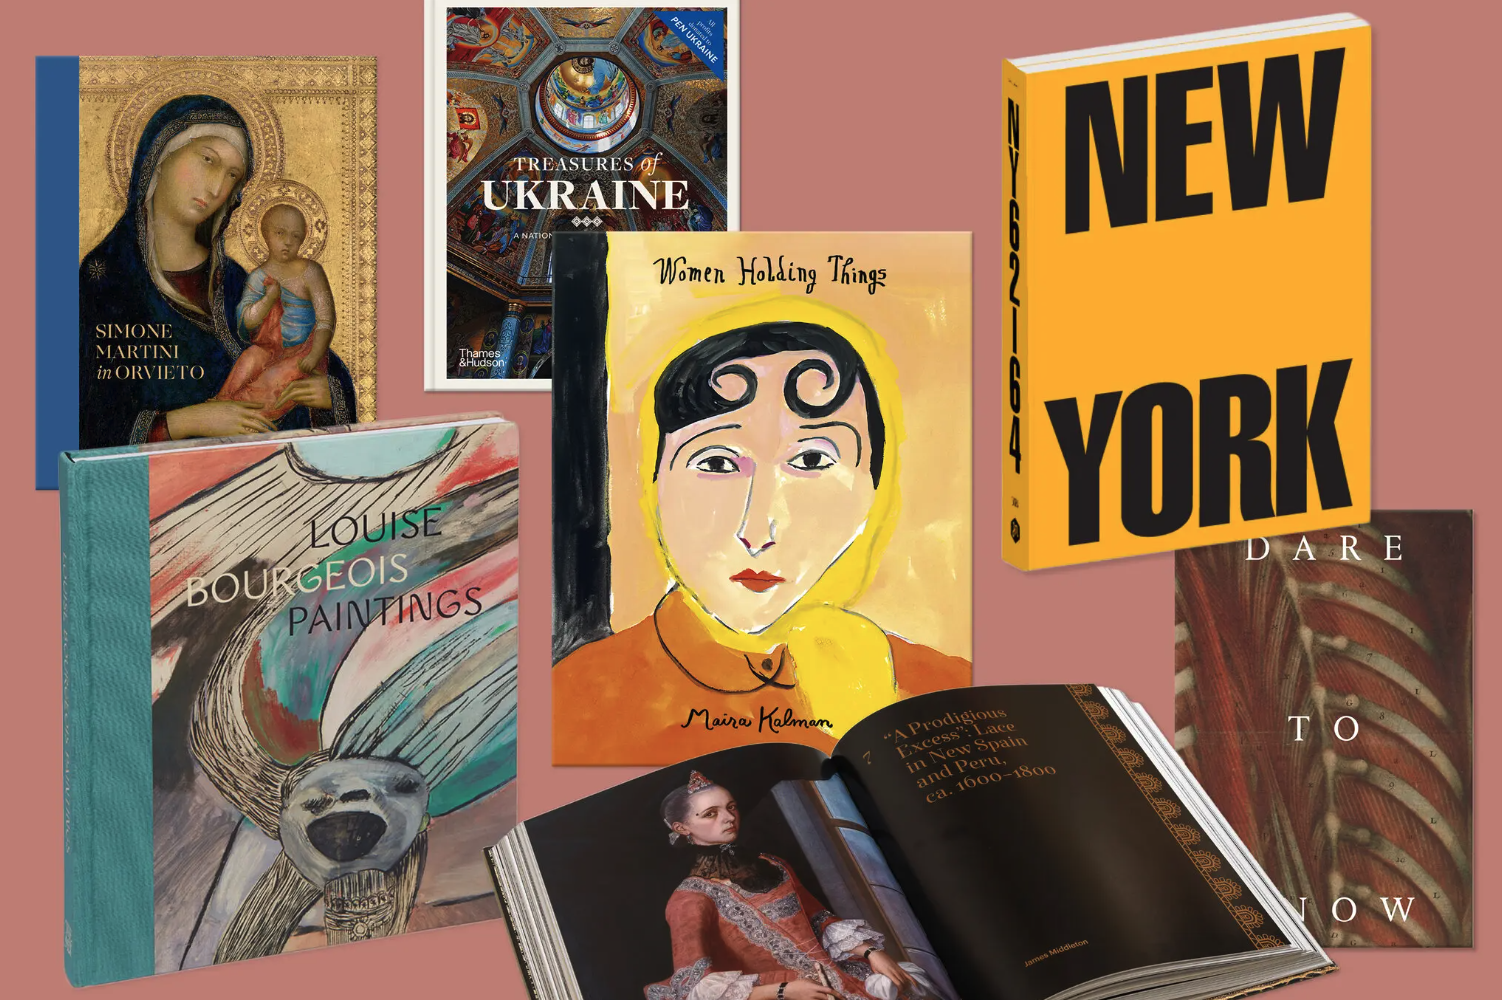 A bounty of art books offers a study of a 14th-century altarpiece, essays on the Enlightenment, little-known paintings by Louise Bourgeois, new ones (and words) by the acclaimed artist Maira Kalman, and a New York culture revolution in the early ’60s.Credit...From left: Yale University Press; The Metropolitan Museum of Art, New York; Harper Design; The Jewish Museum; Yale University Press